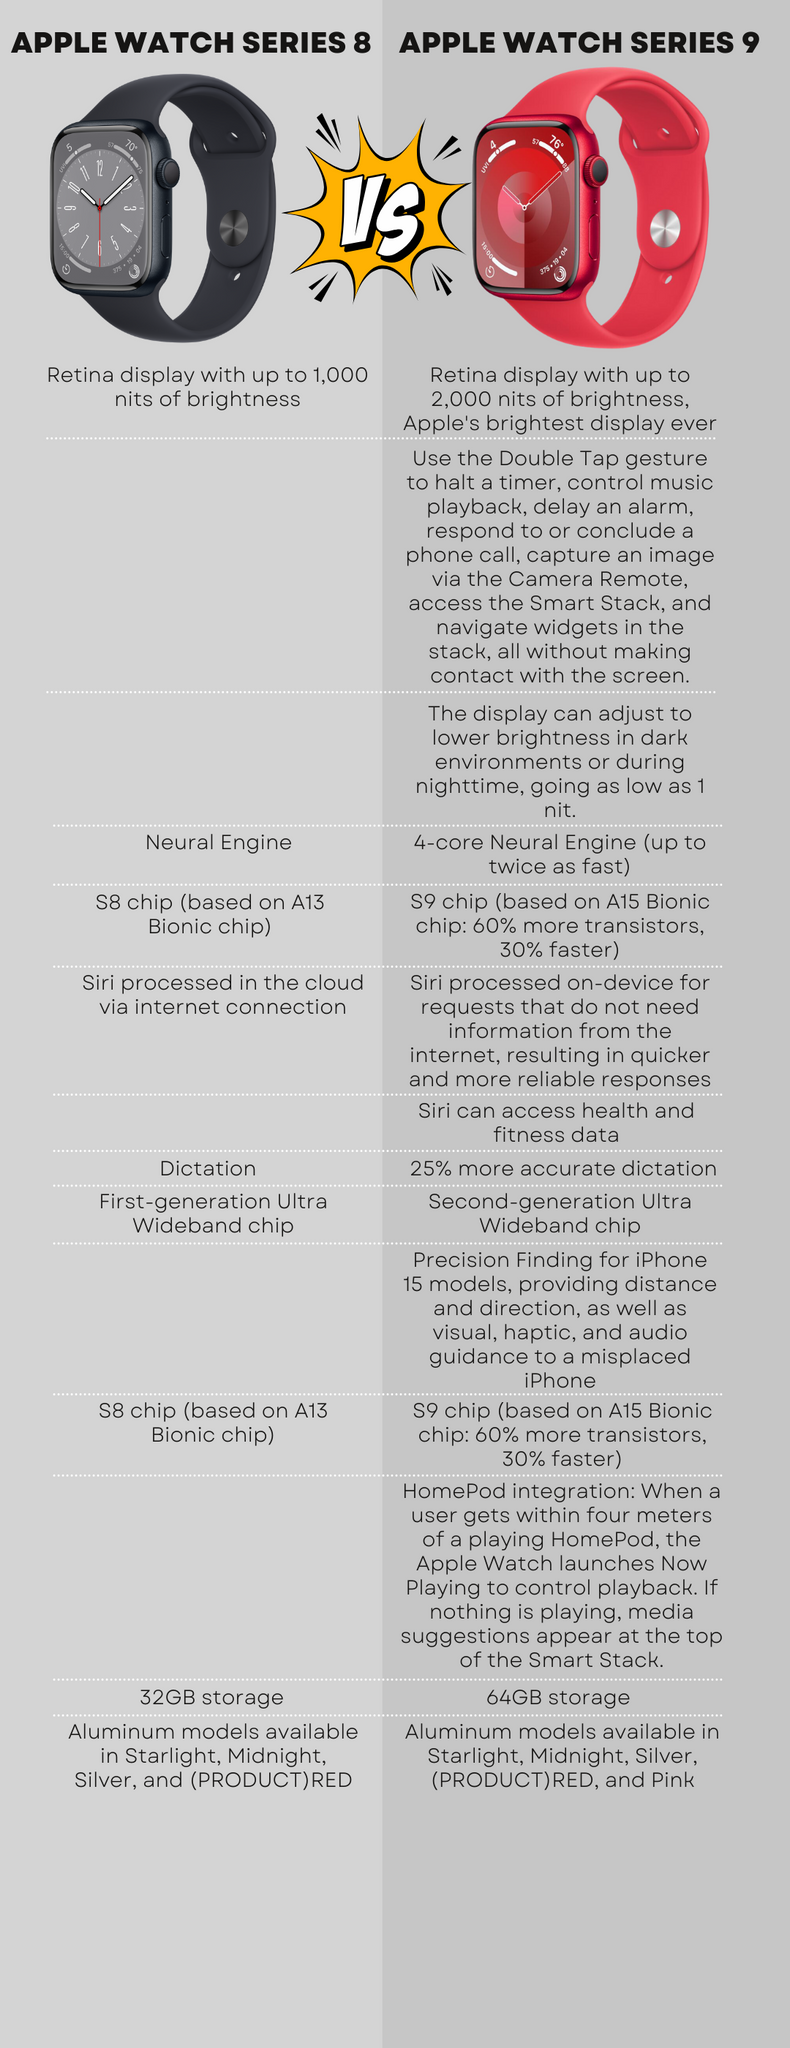 Apple Watch Series 8 and Series 9 comparison infographic